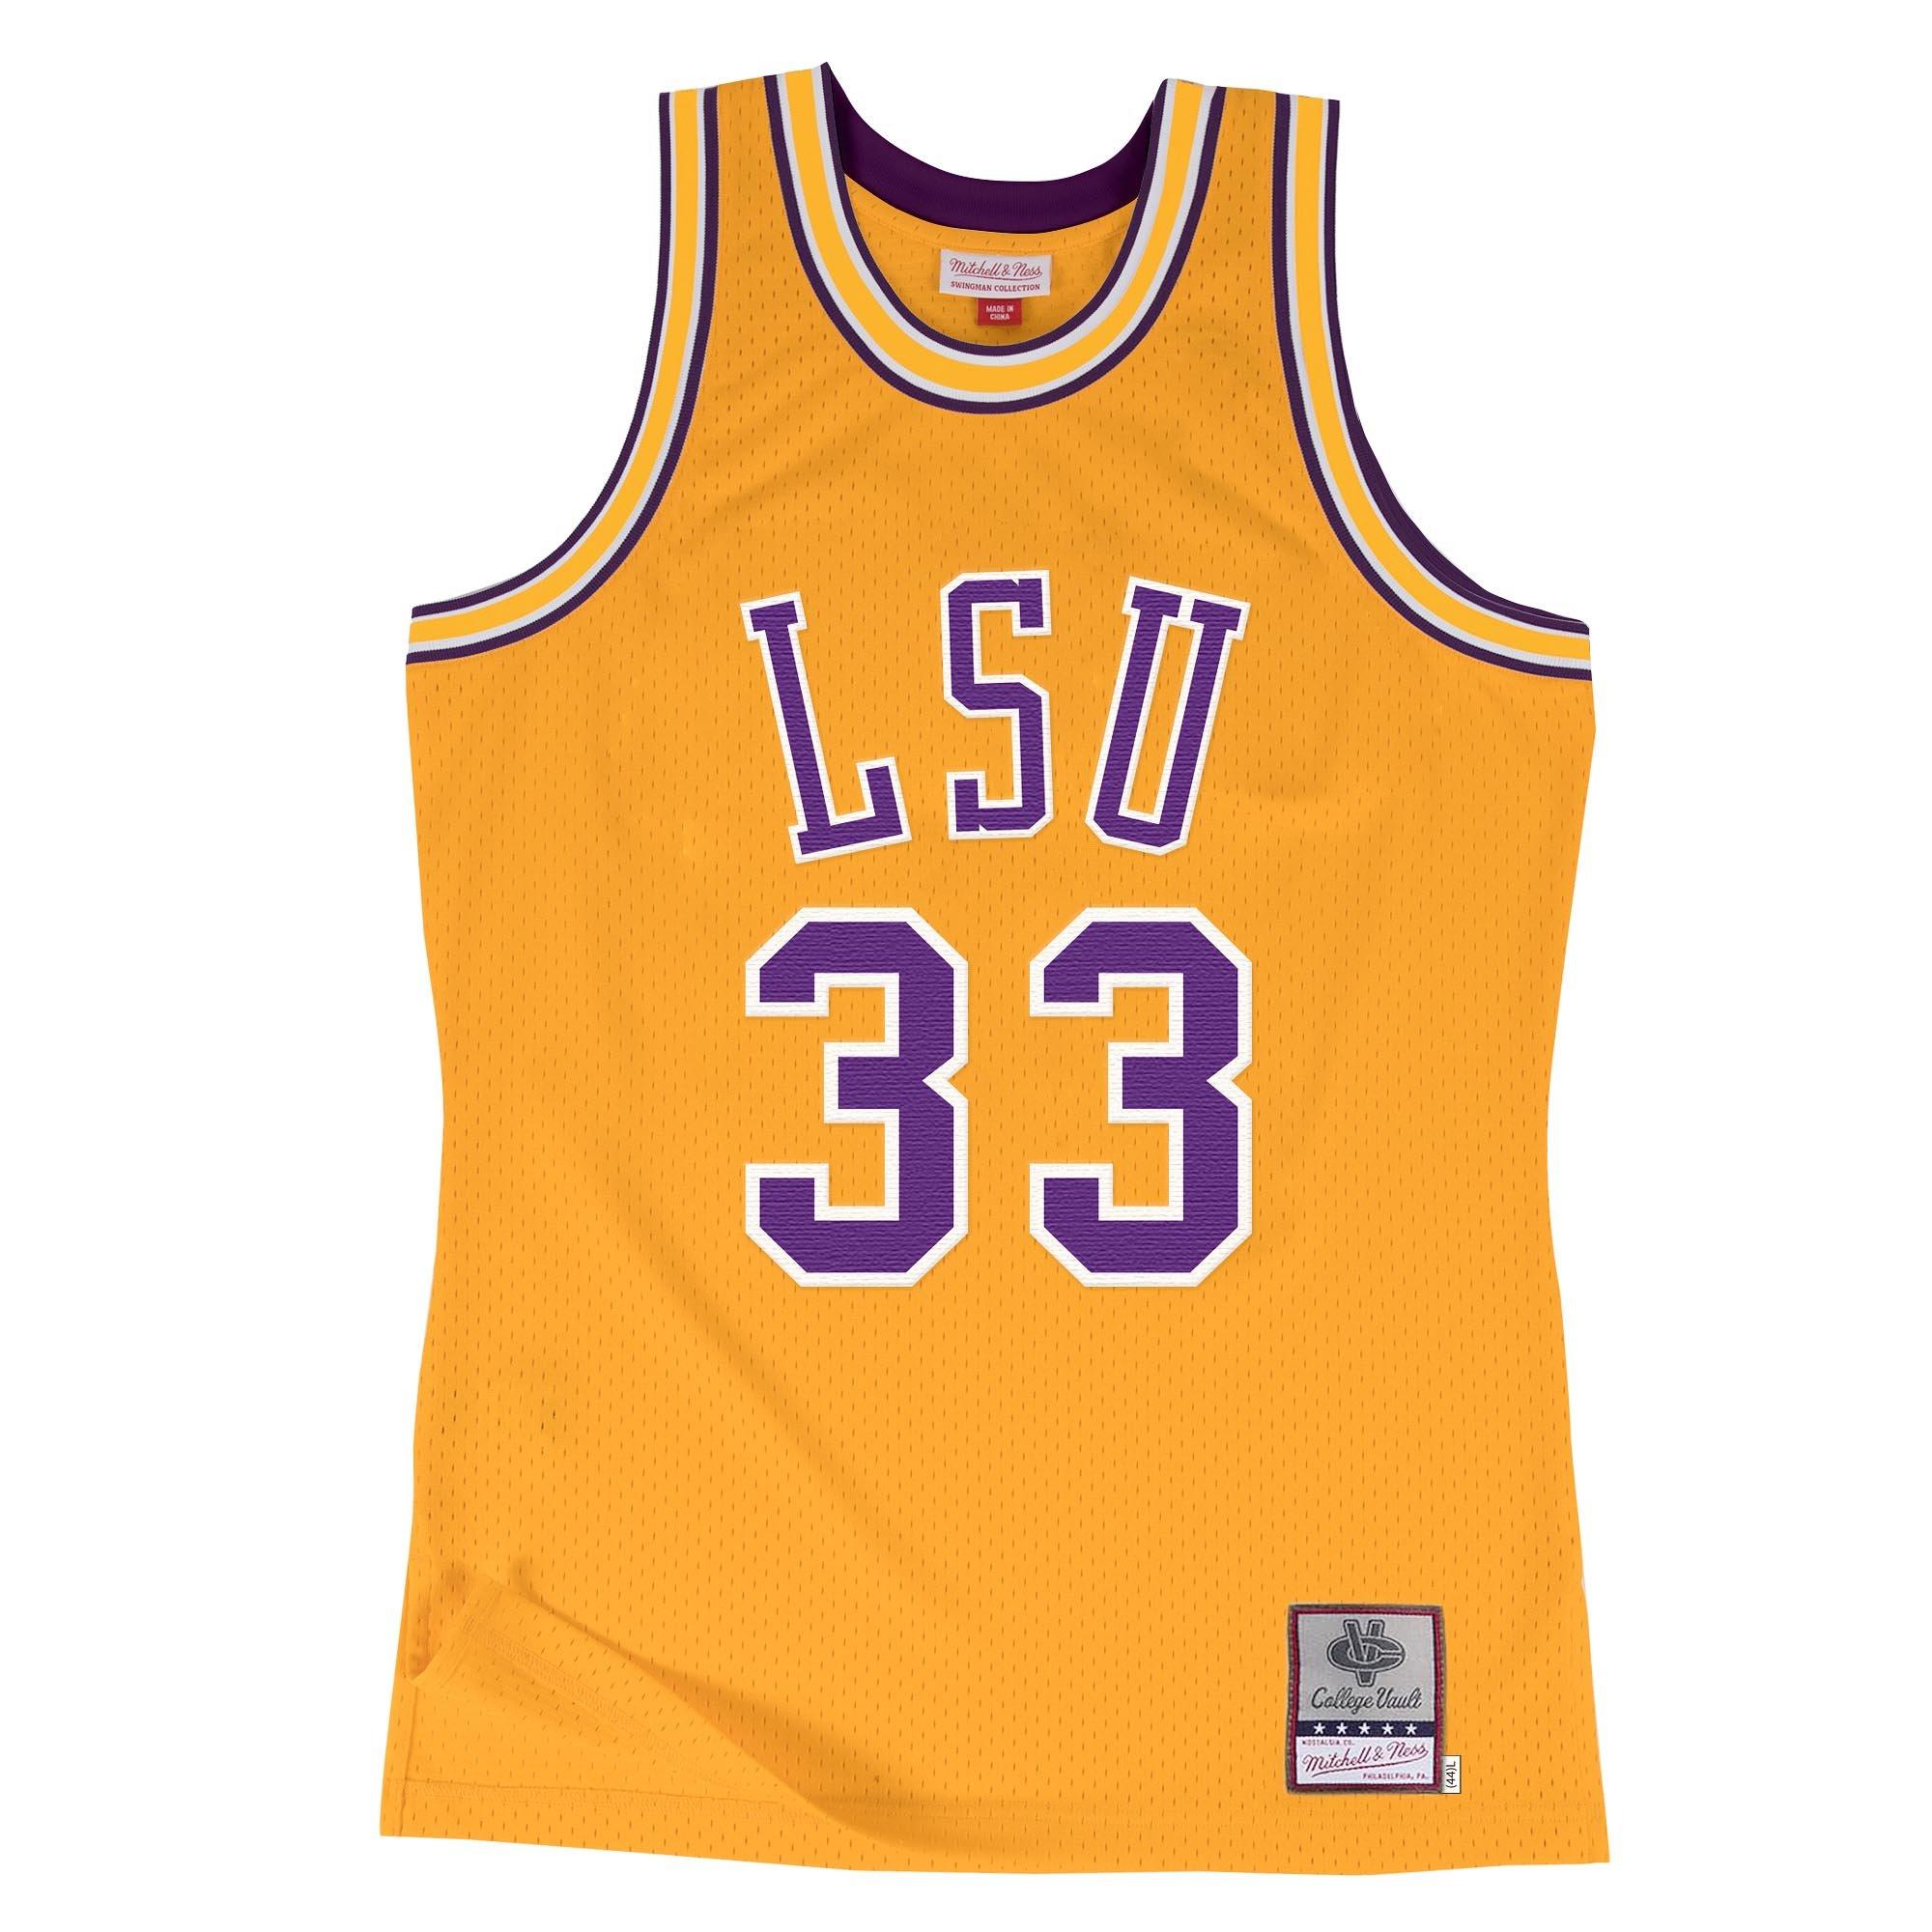 Men's Mitchell & Ness Shaquille O'Neal White LSU Tigers College